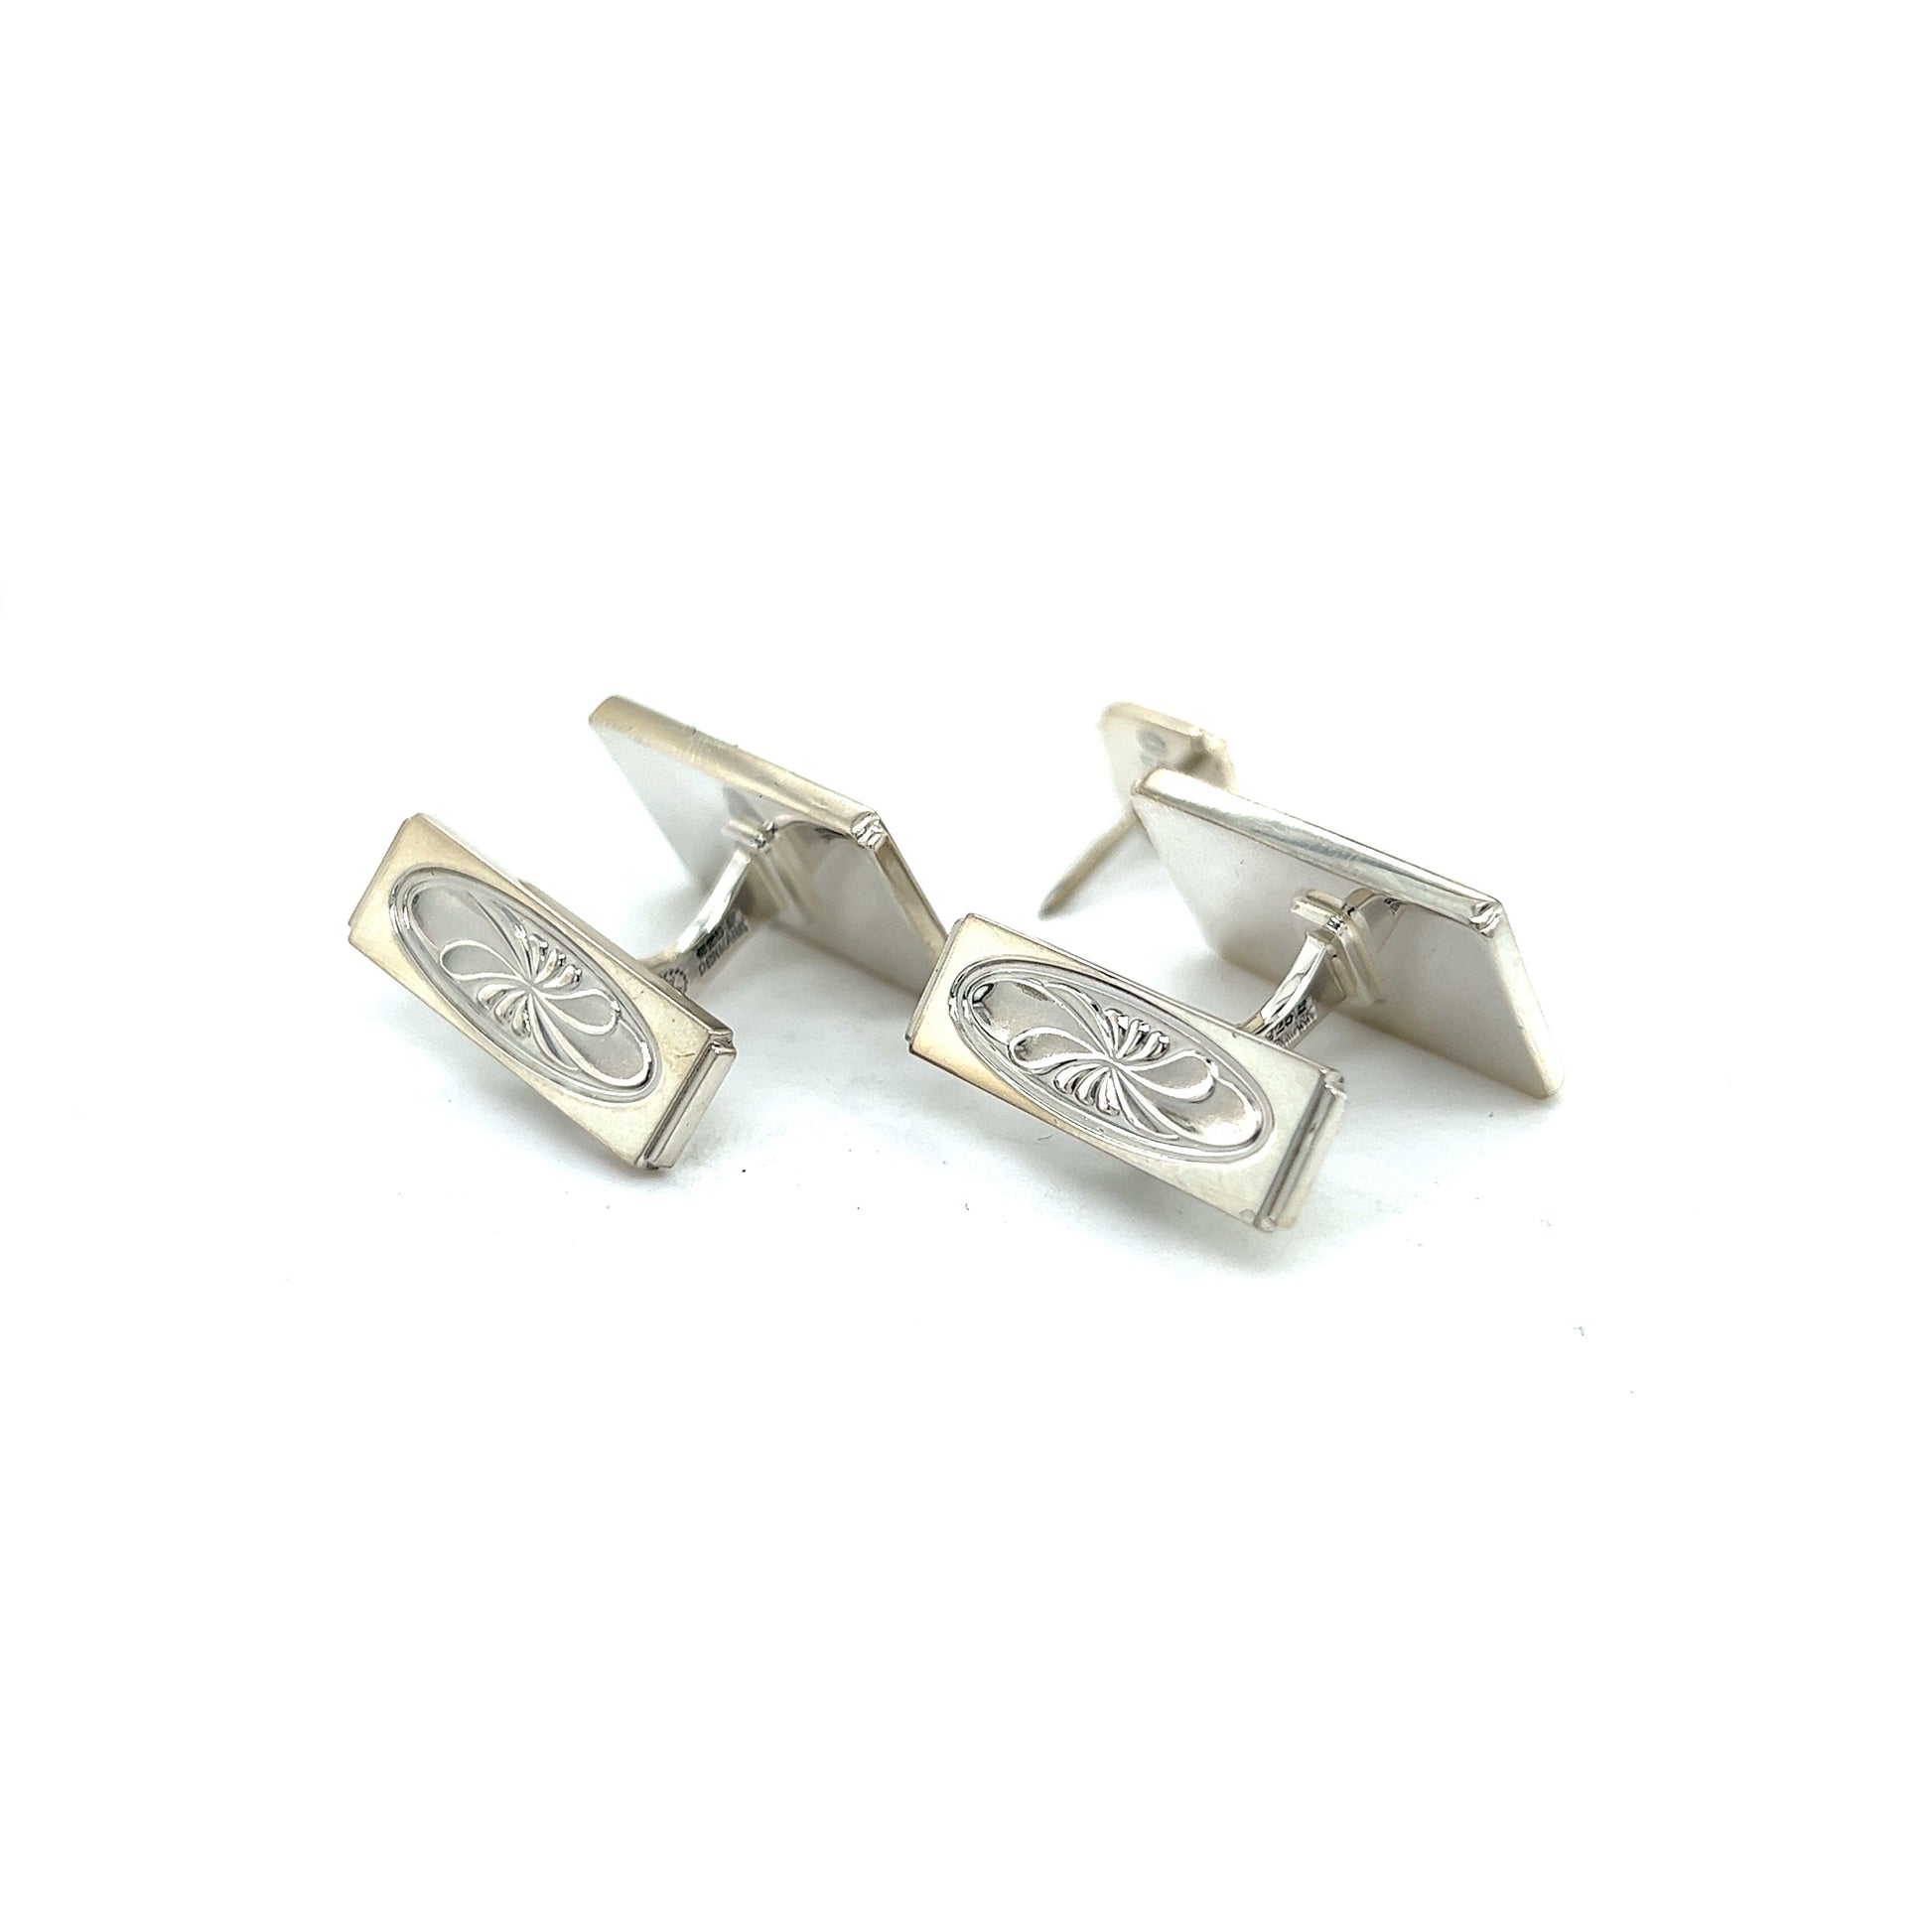 Georg Jensen Estate Mens Cufflinks Set With Tie Pin Without Back of  Tie Pin Silver GJ11 - Certified Fine Jewelry